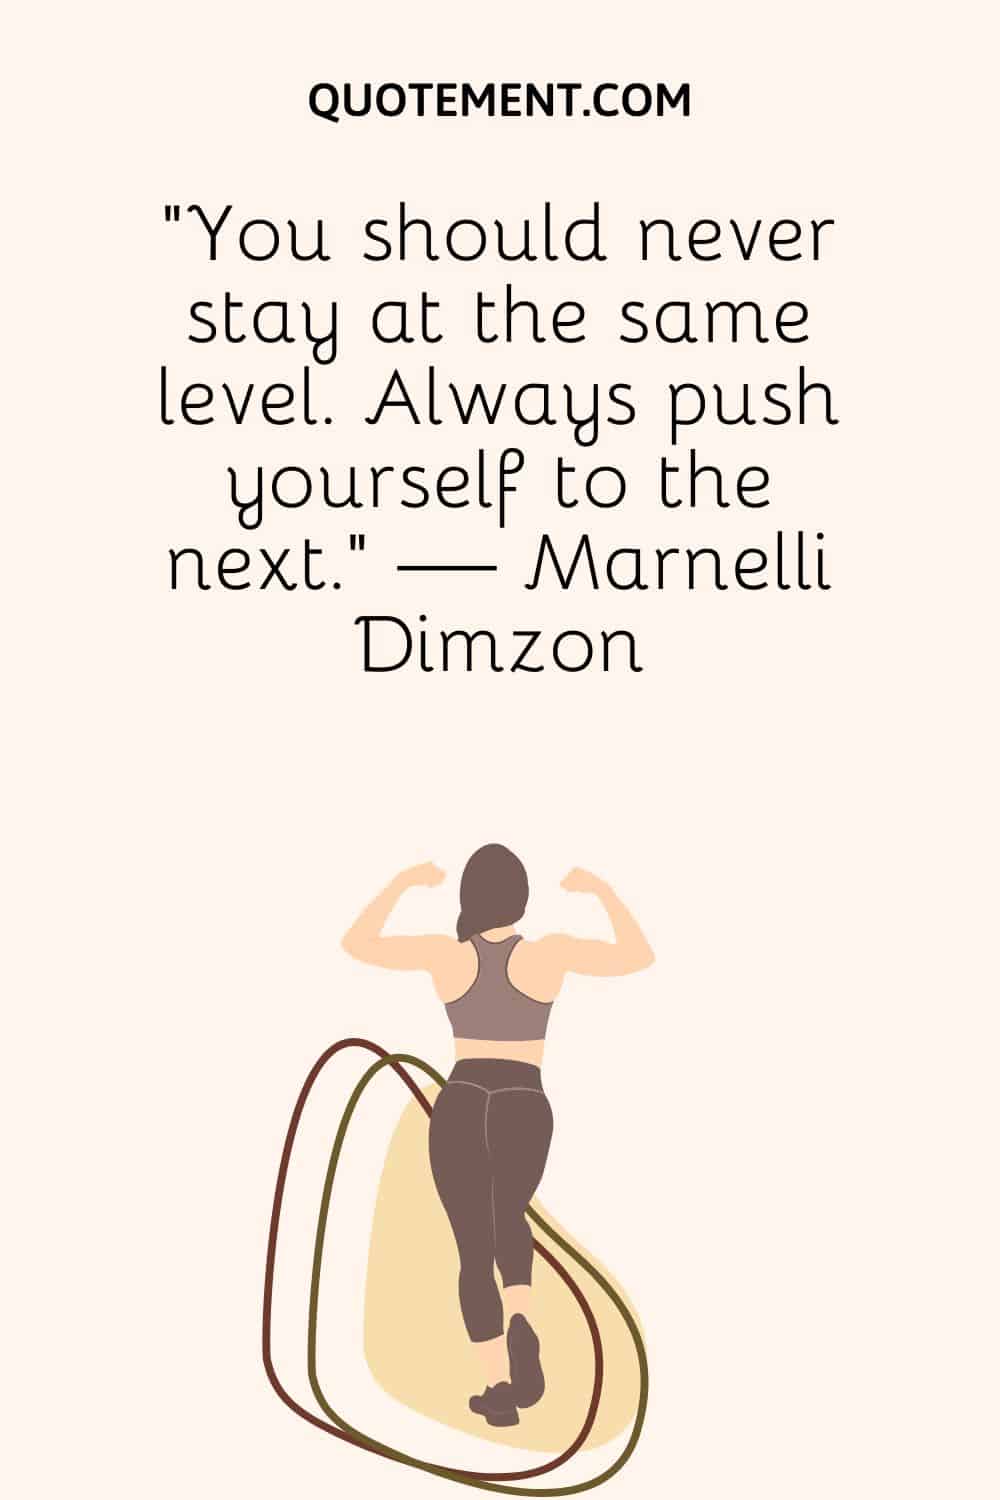 workout girl image representing fitness journey quote